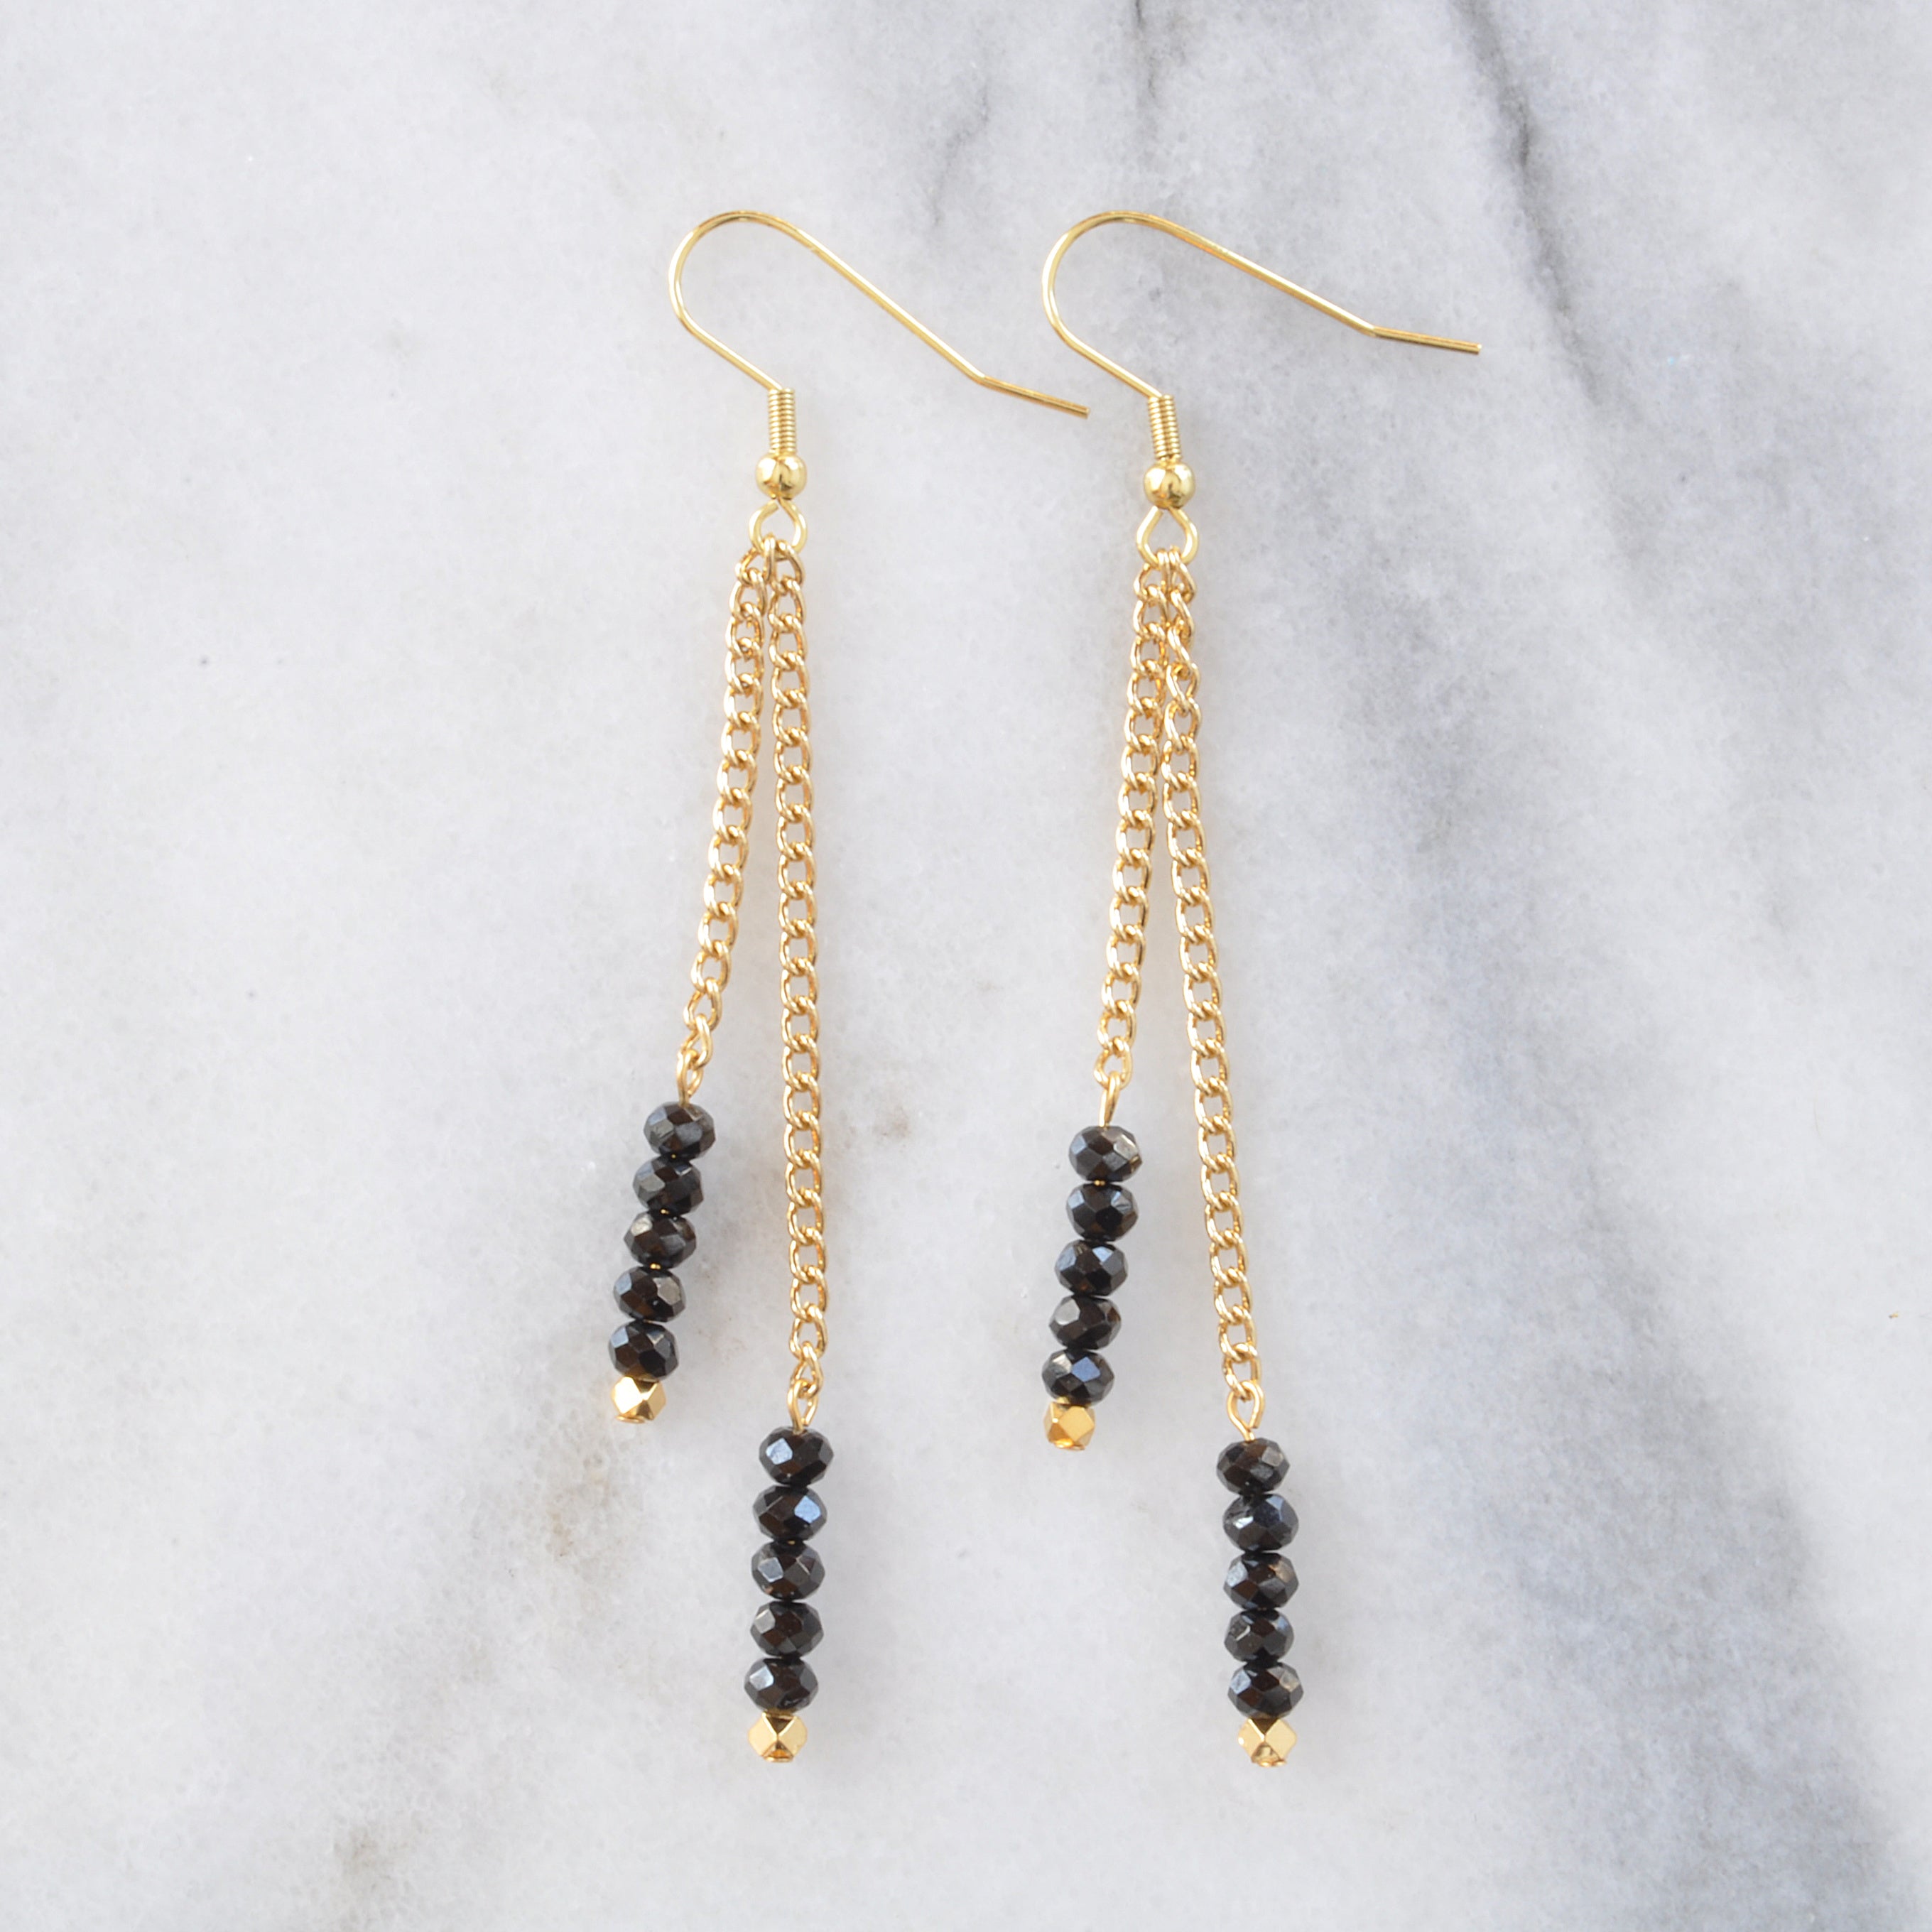 Libby & Smee Gemstone Gold chain Earrings available with Black Spinel beads